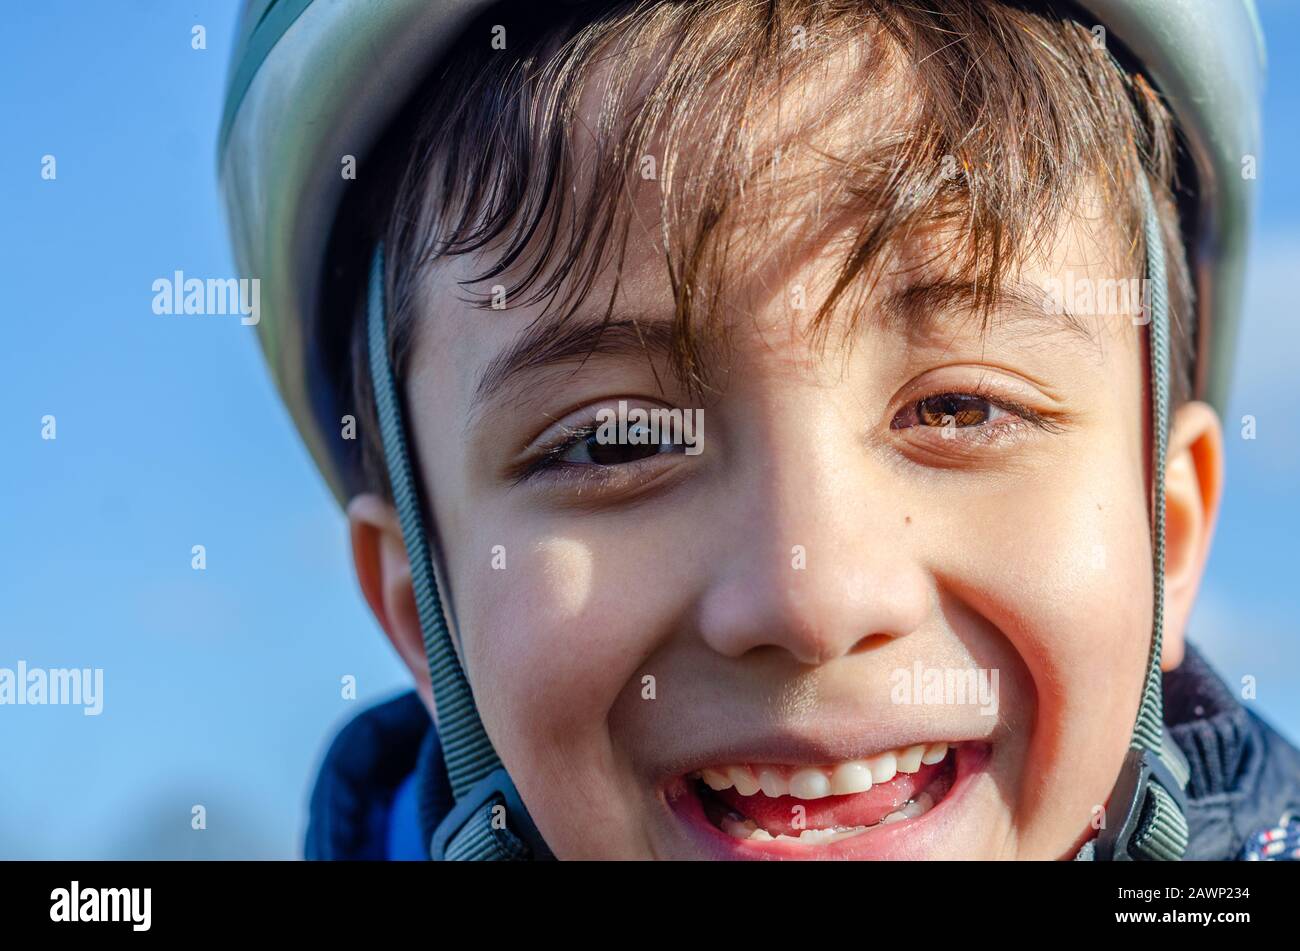 Portrait of a young boy outdoors wearing a bicycle helmet and smiling. Stock Photo